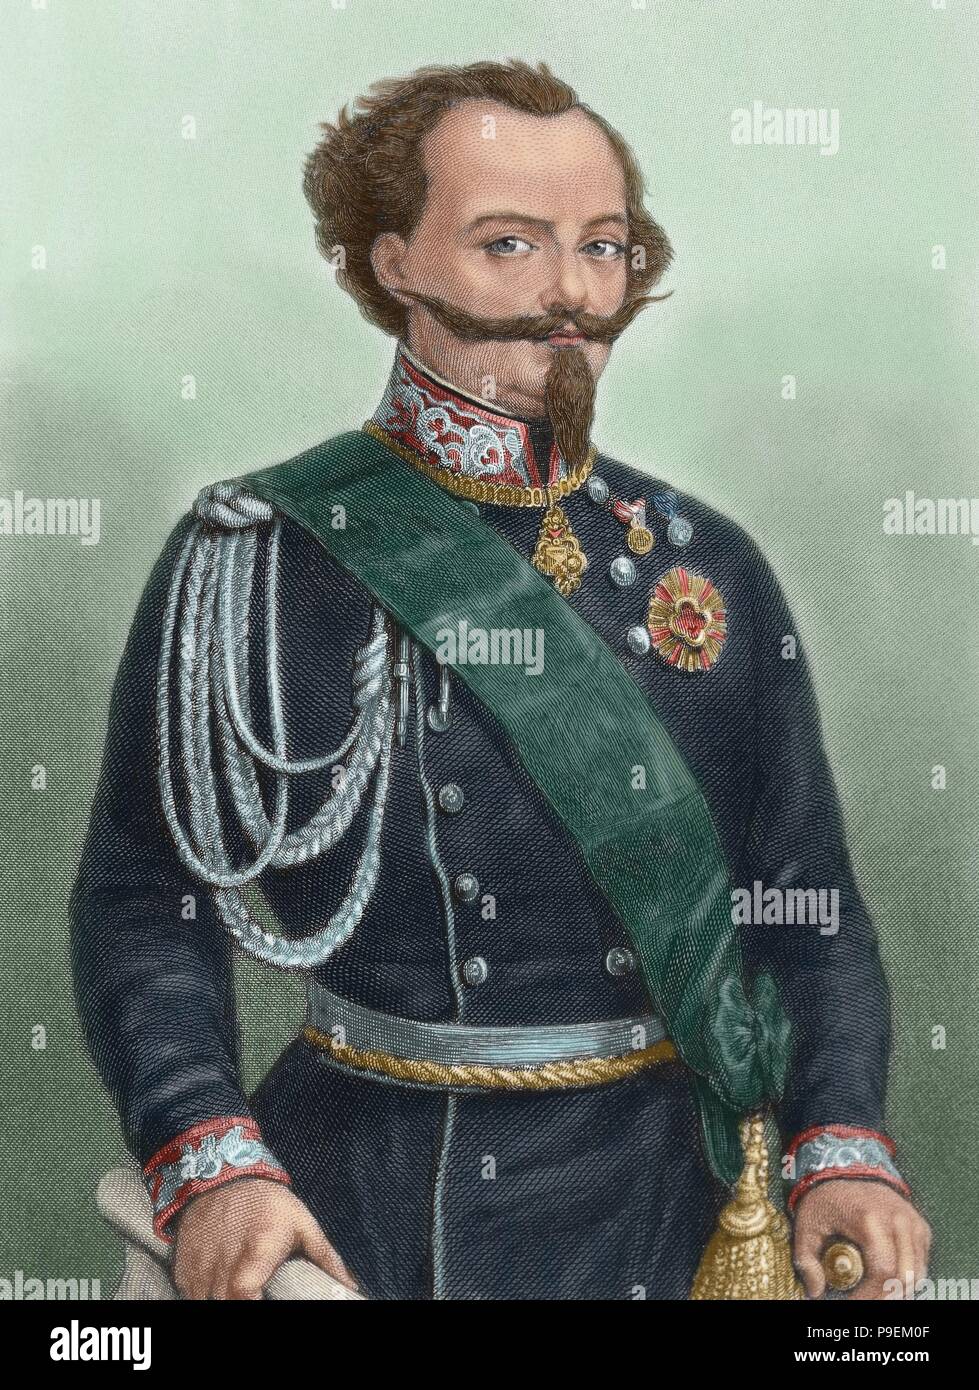 Victor Emmanuel II (1820-1878). King of Sardinia (1849-1861) and king of Italy (1861-1878). Portrait. Engraving. 'Historia Universal', 1881. Colored. Stock Photo